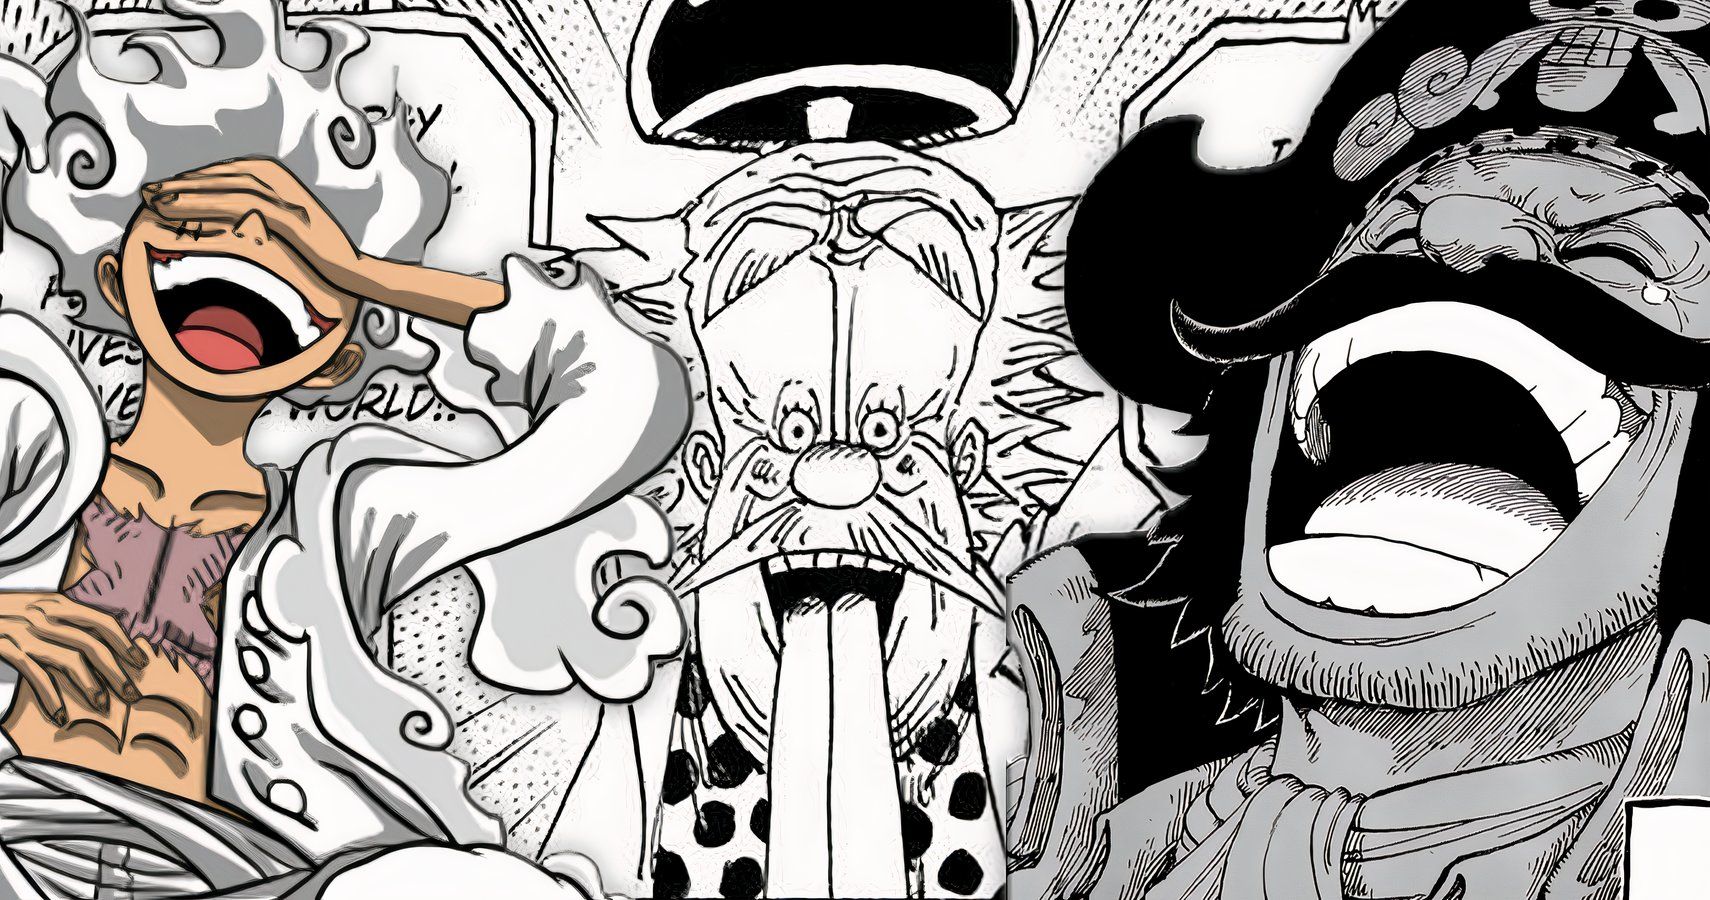 Gear 5 Luffy laughing, Dr Vegapunk, and Gol D Roger laughing